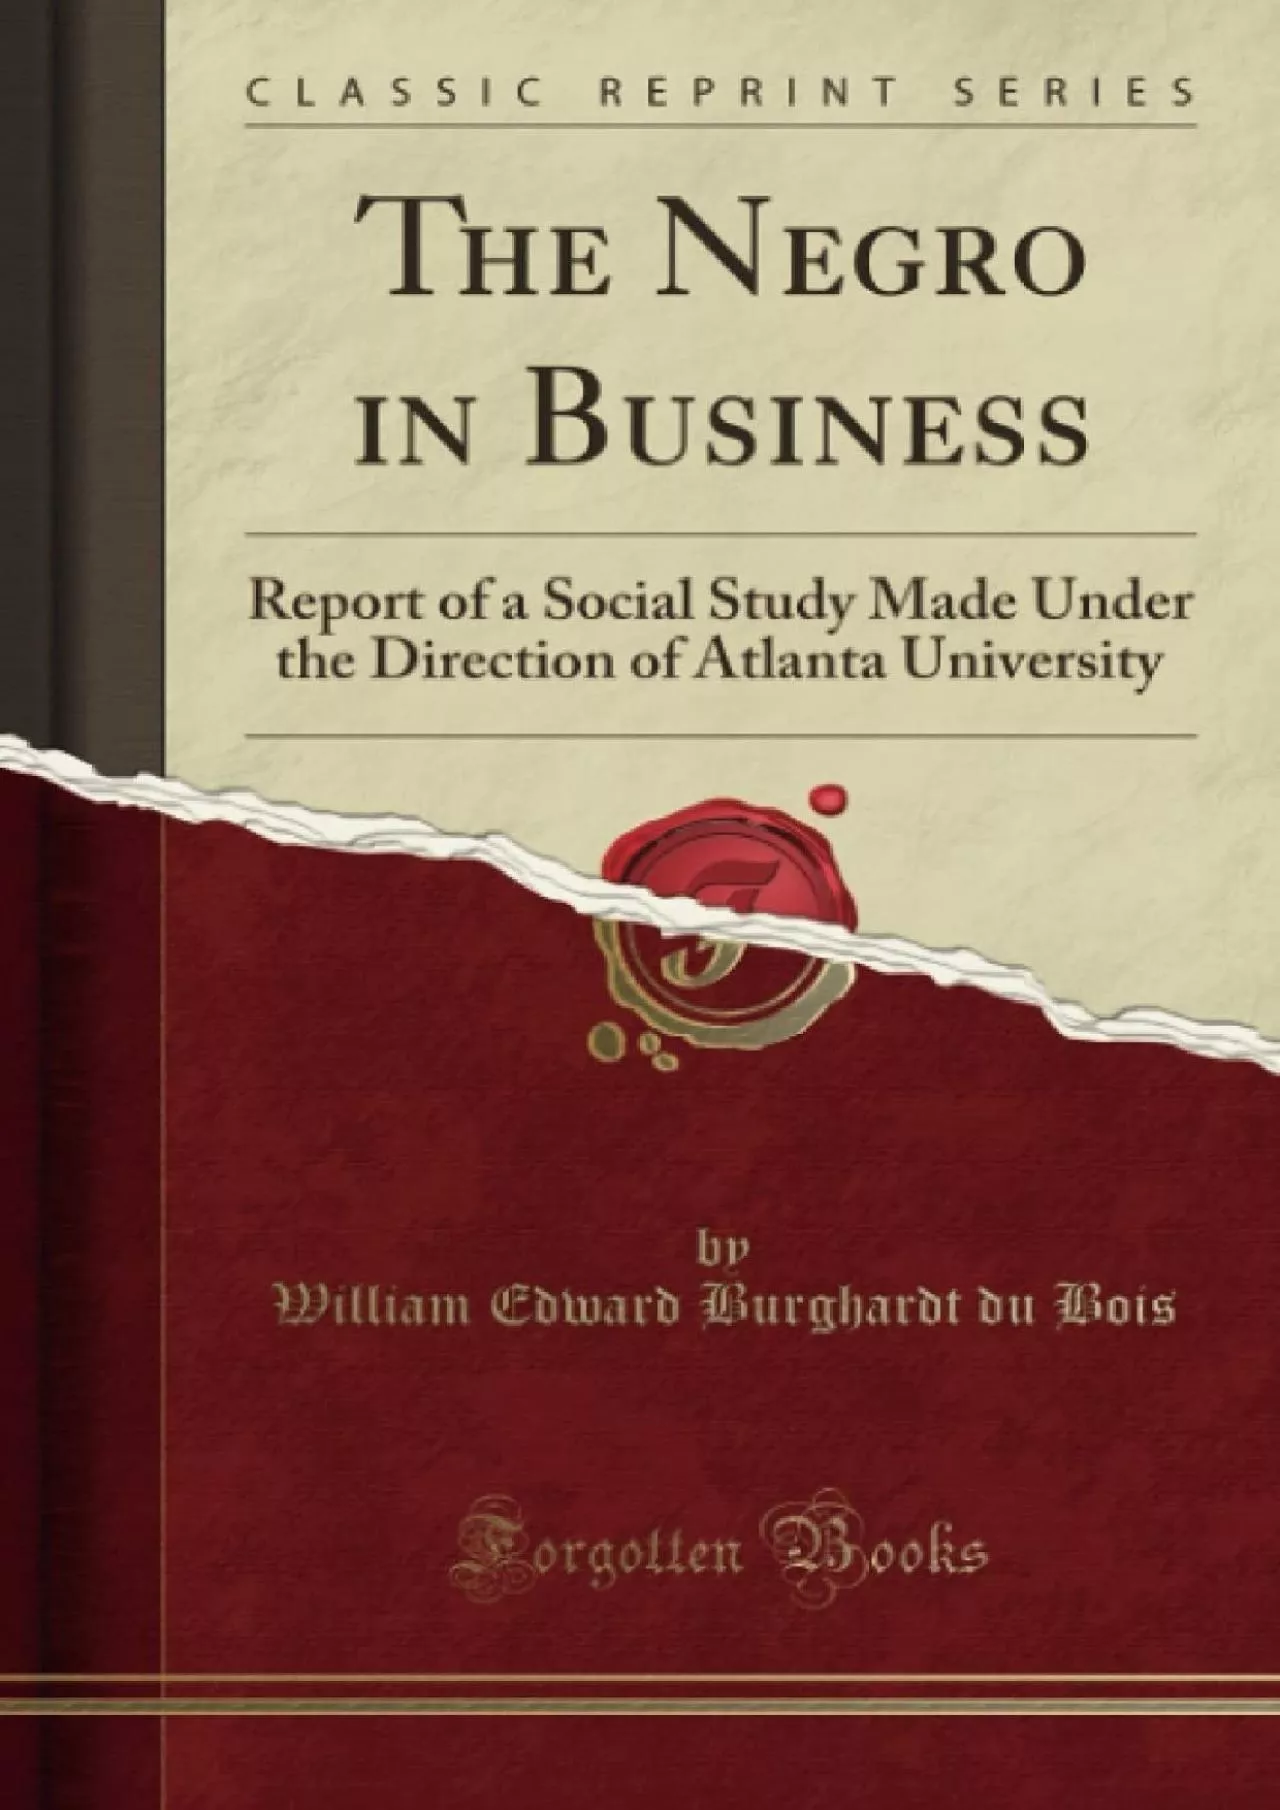 (BOOK)-The Negro in Business: Report of a Social Study Made Under the Direction of Atlanta